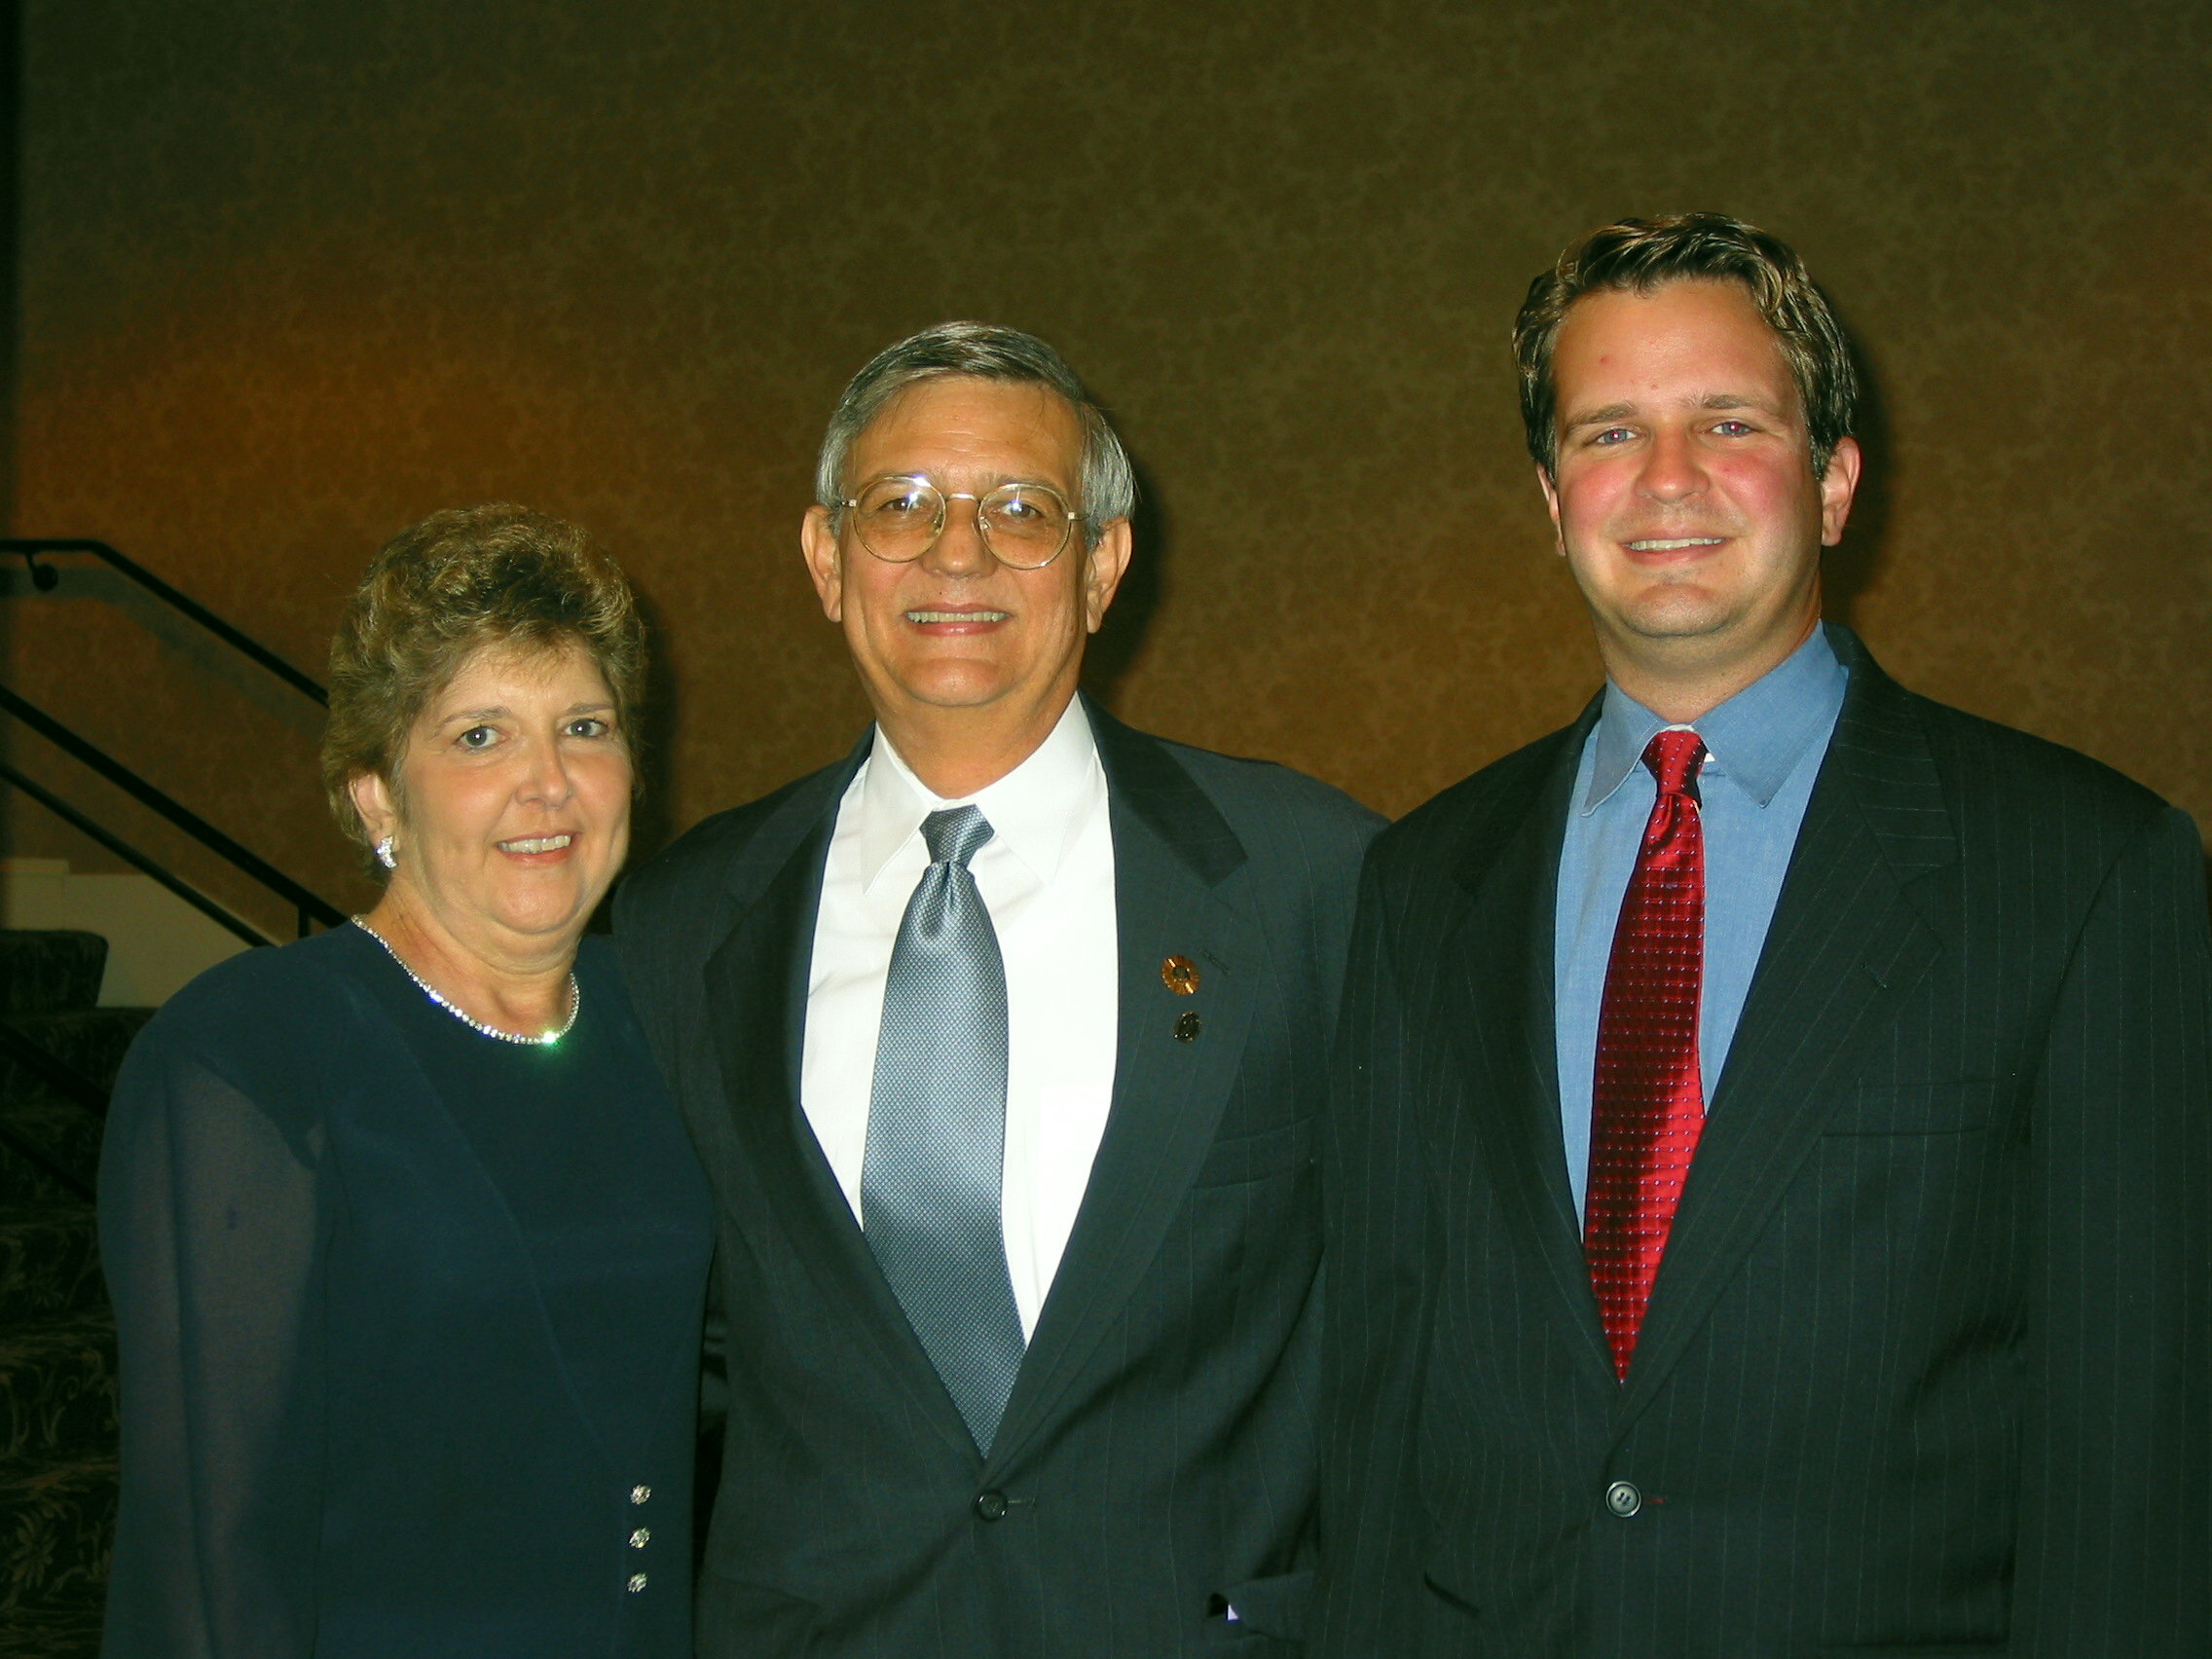 Former Purchasing Director Dick Cummings (center) is pictured at a special reception honoring him for his dedication to NIGP. He is photographed with his wife and son.